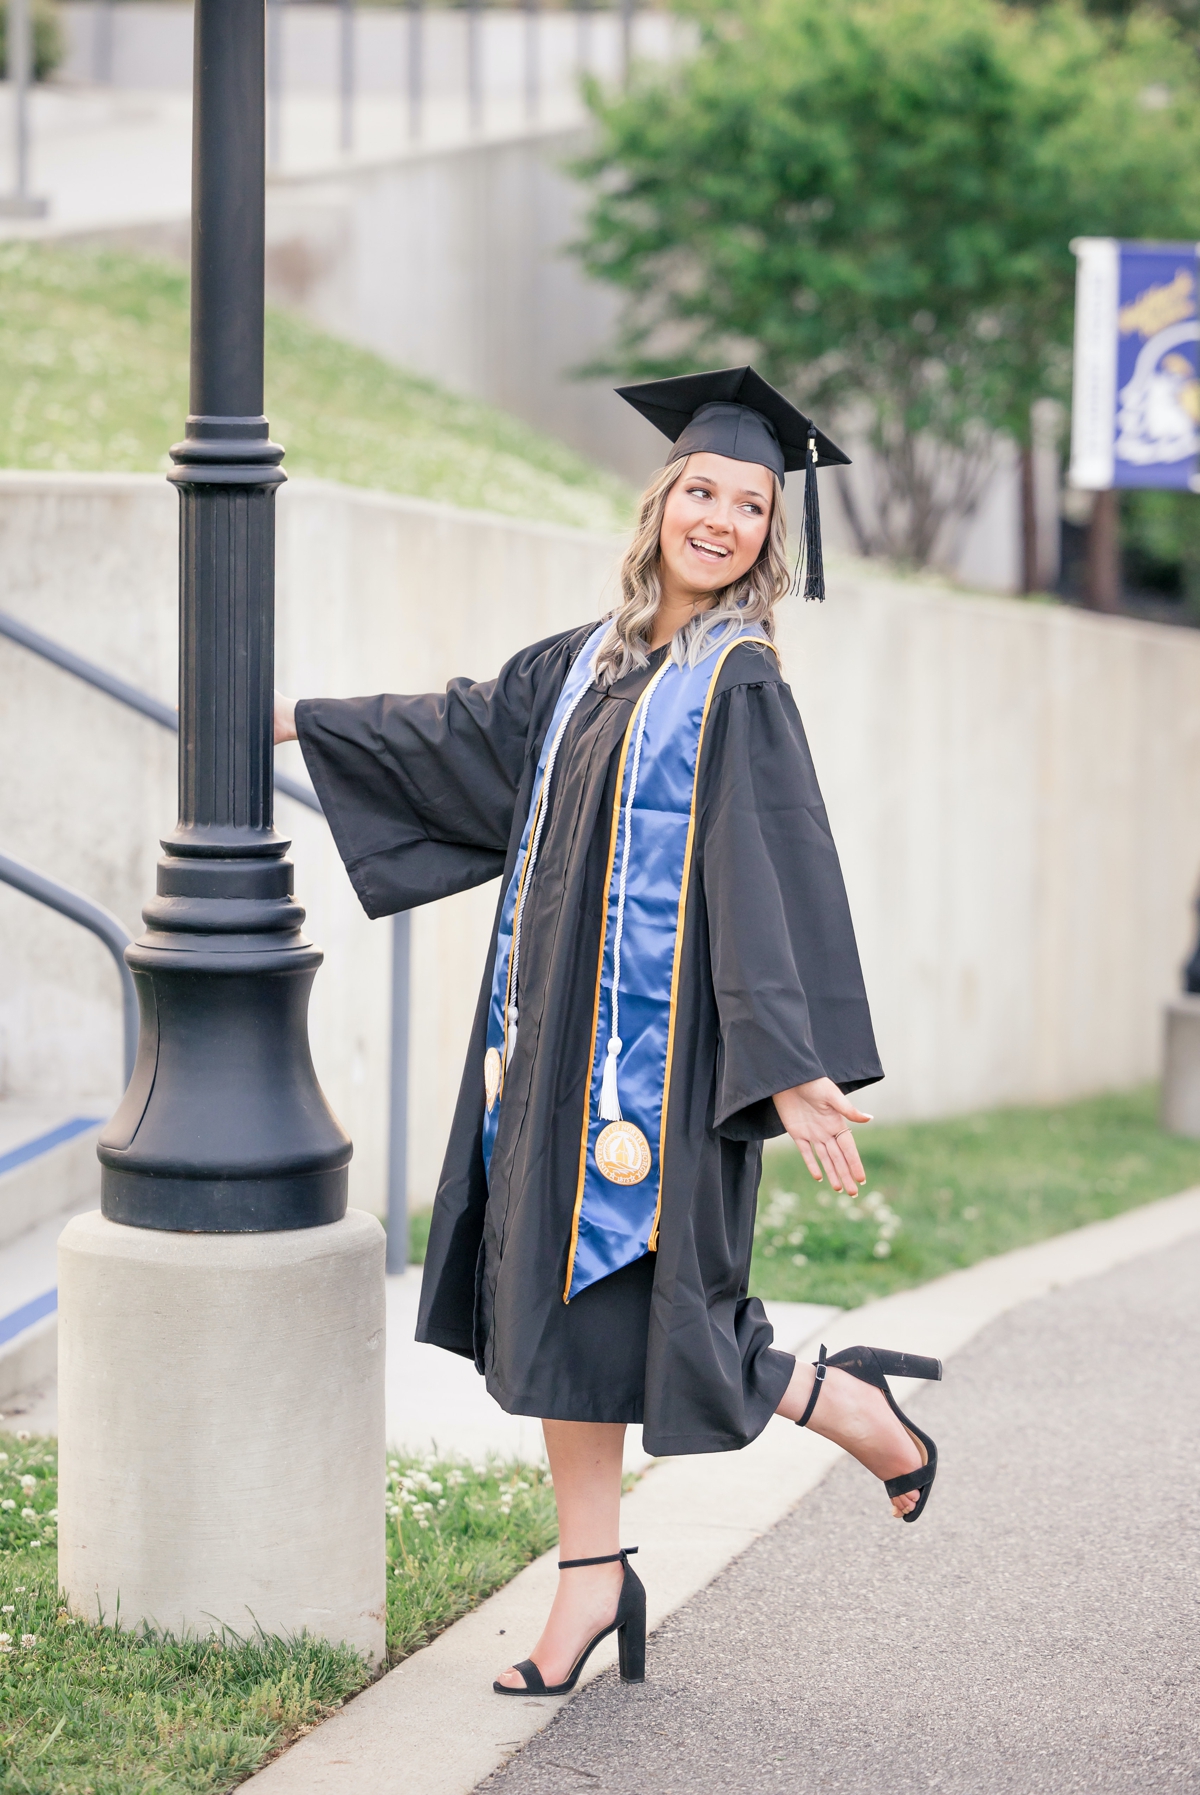 A woman in her University of North Georgia cap and gown laughing over her shoulder while she holds on to a light pole.